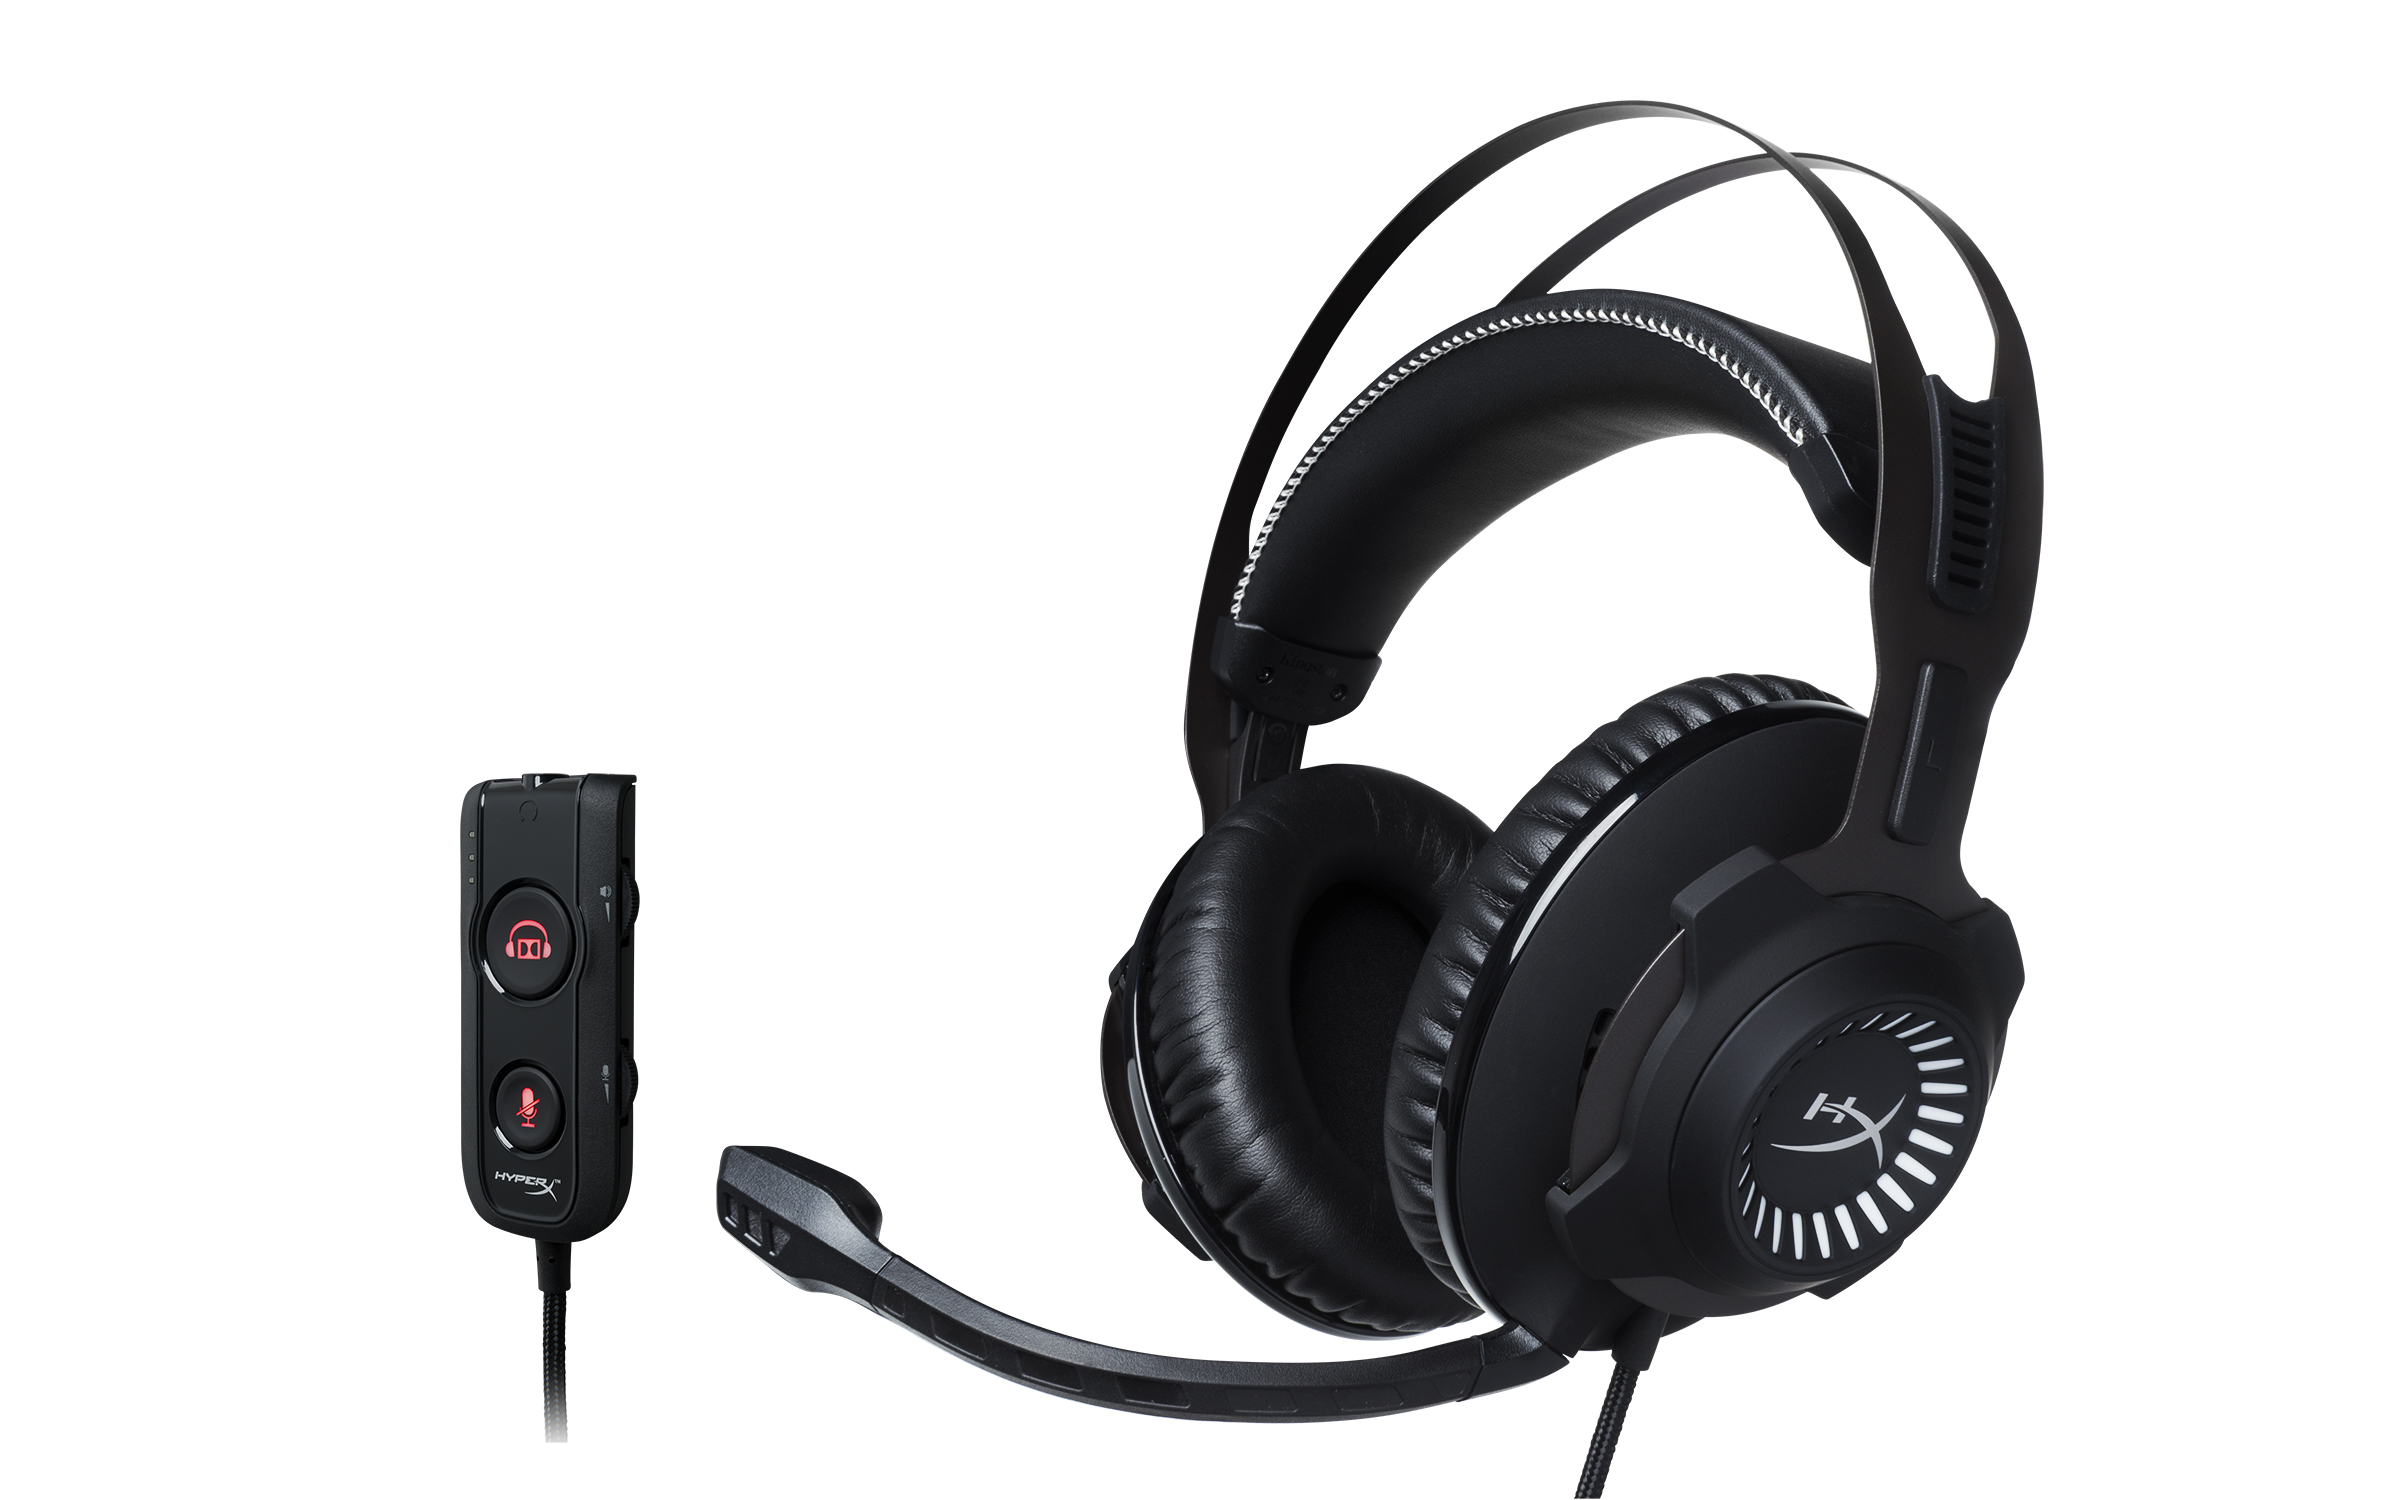 The HyperX Cloud Revolver S is Coming to PH